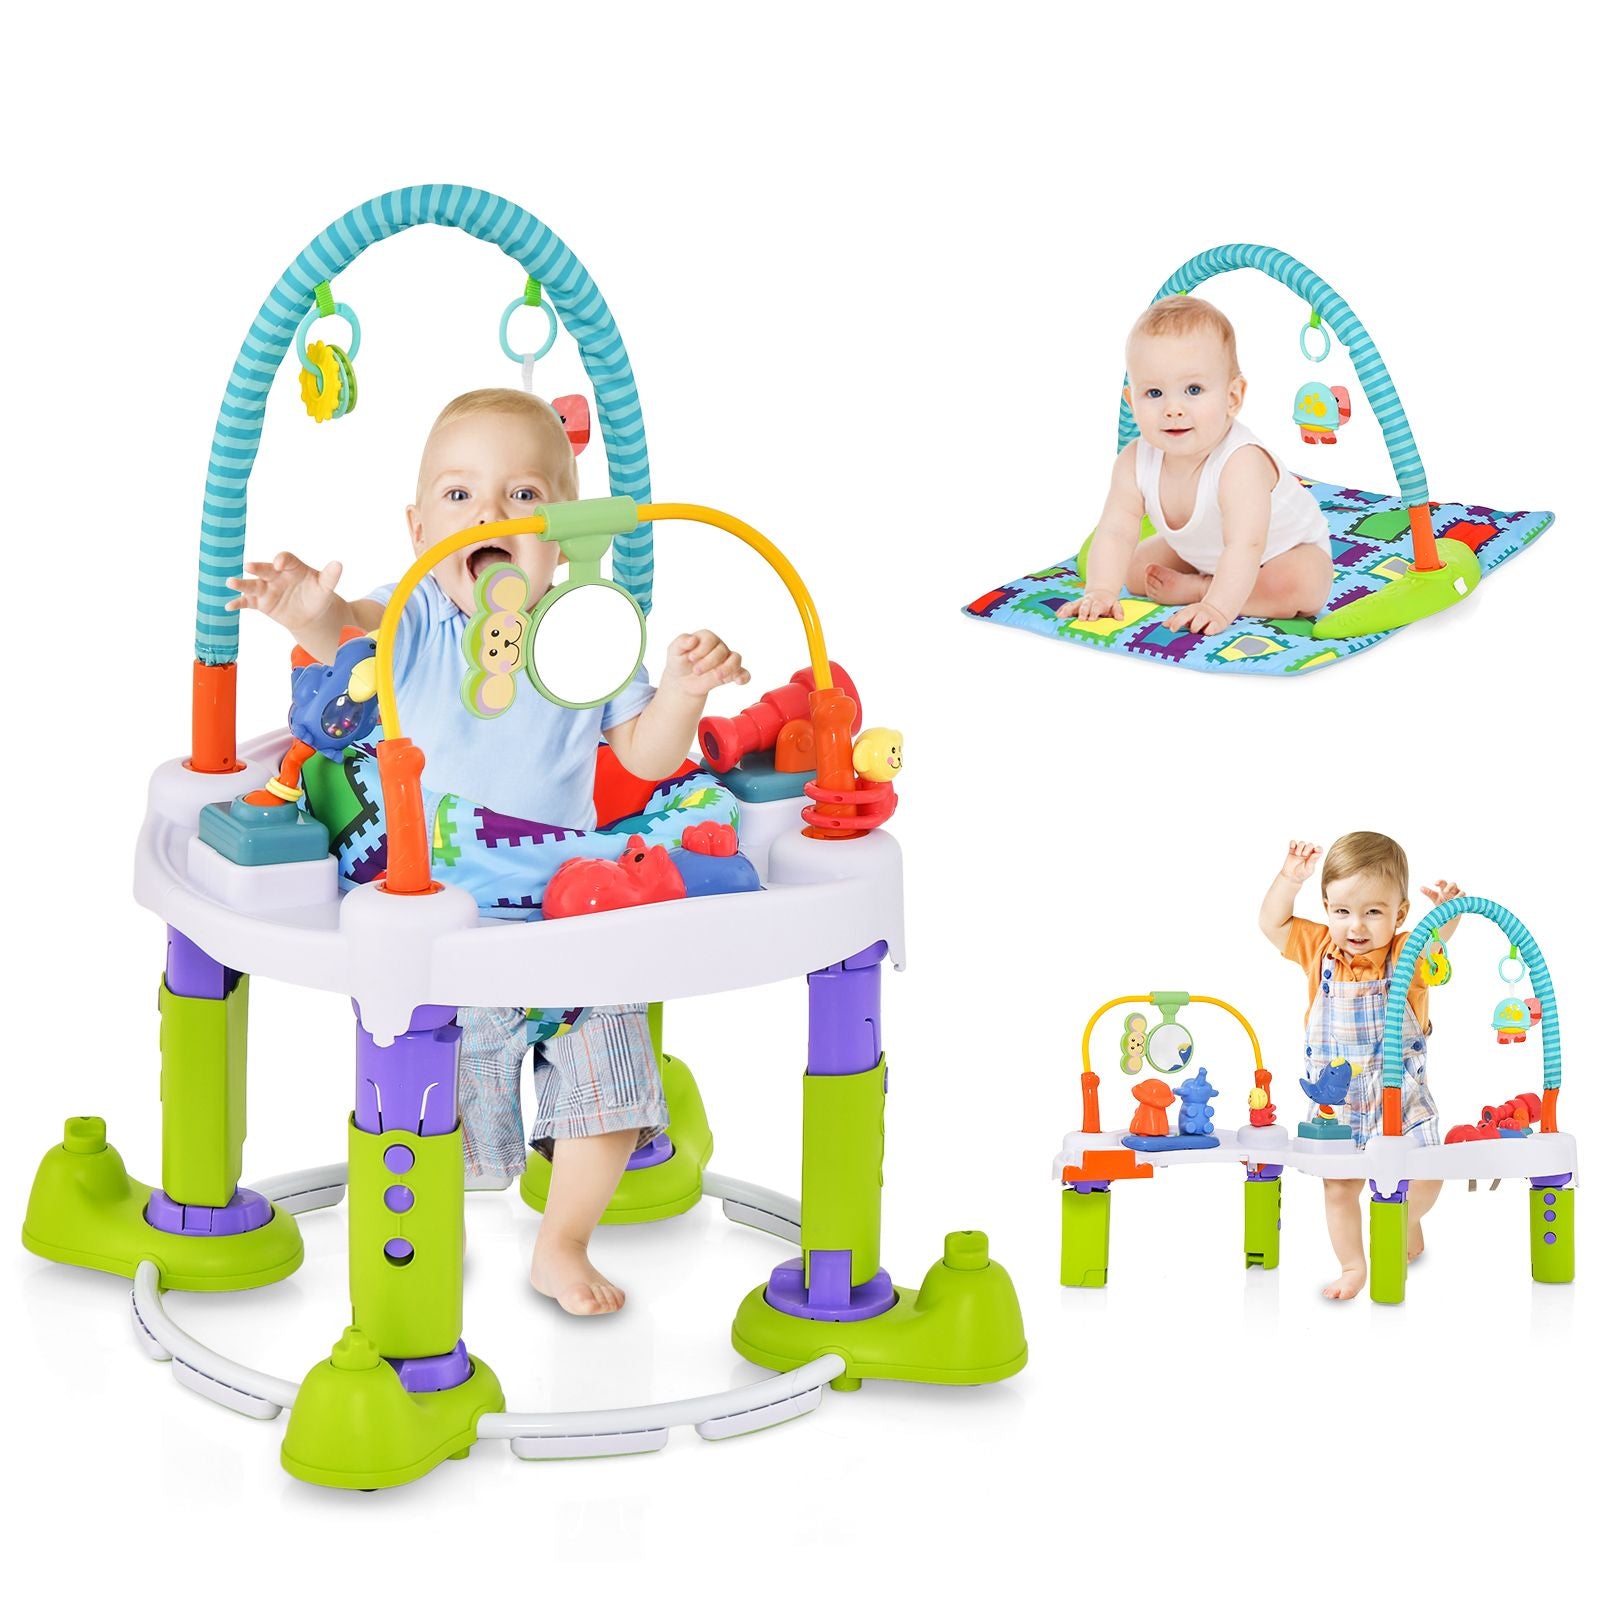 4-In-1 Baby Bouncer Activity Center with 3 Adjustable Heights